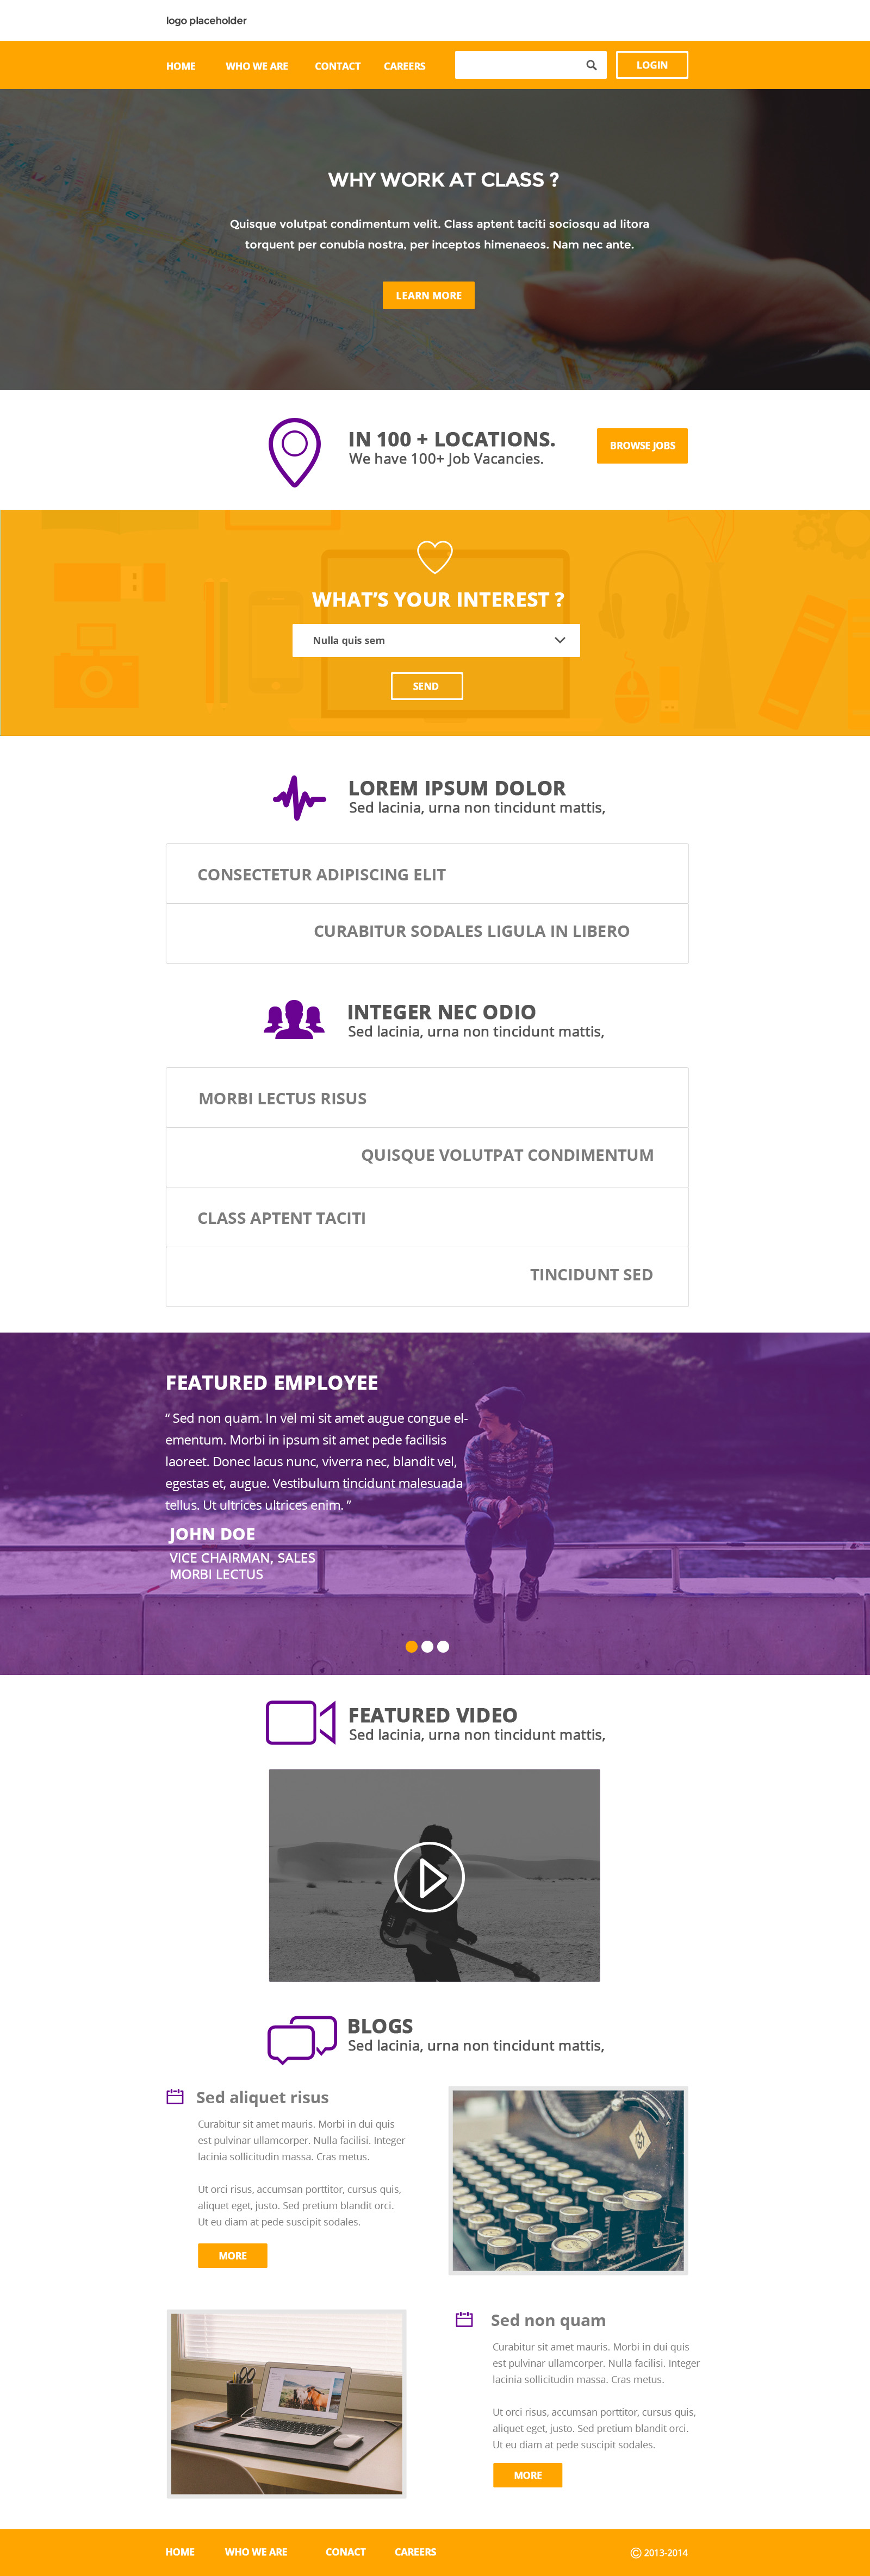 Flat Clean Corporate Layout Web Template PSD